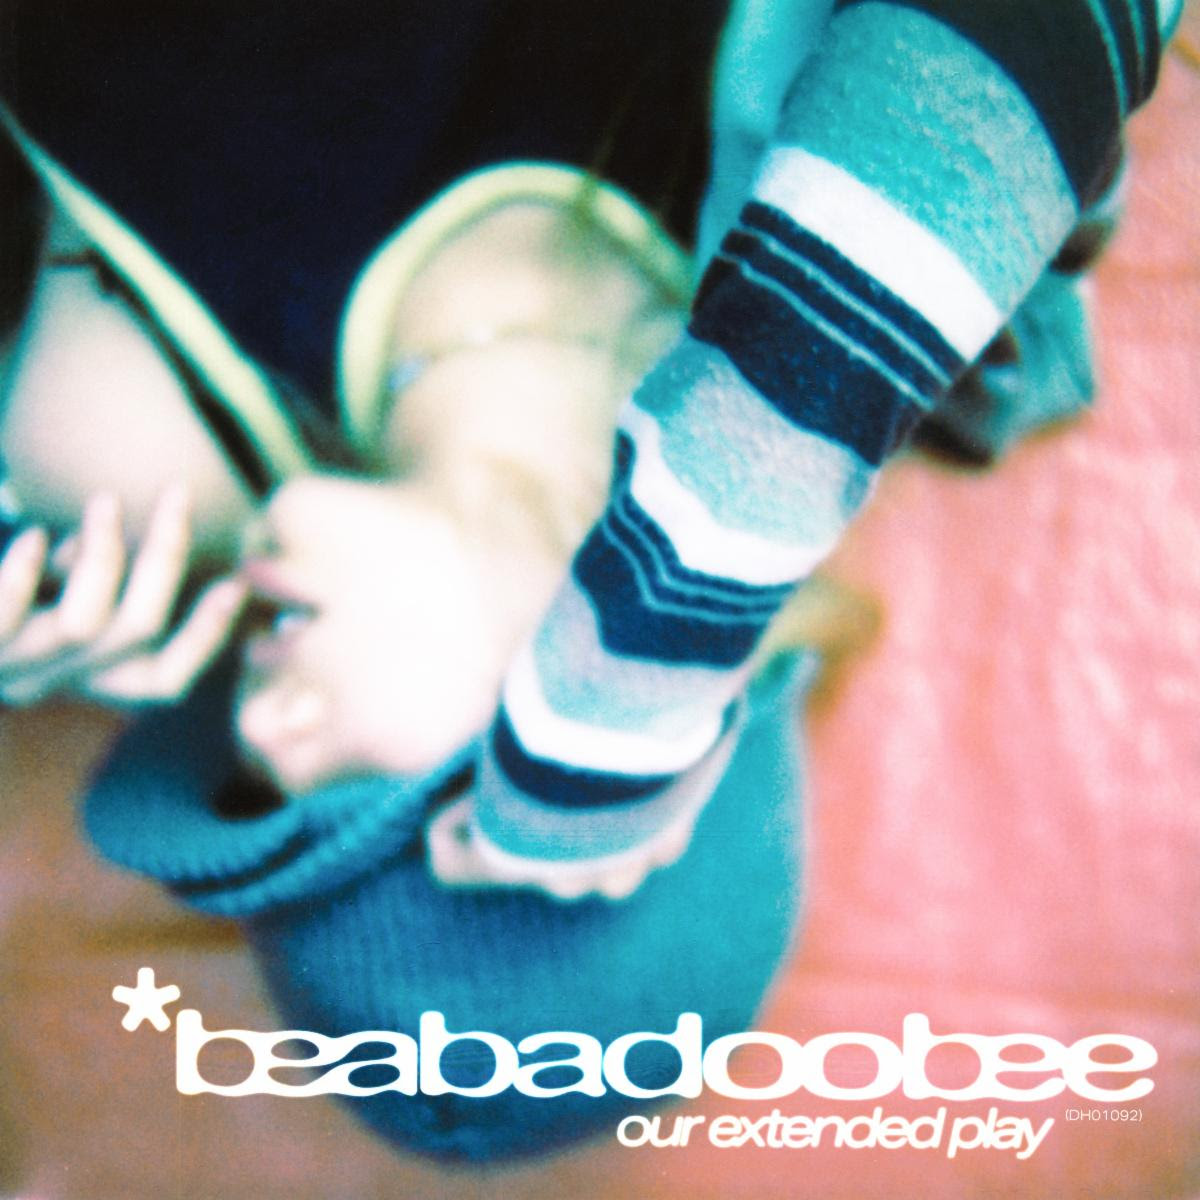 Chronique single : beabadoobee - Our Extended Play EP - Sound Of Violence